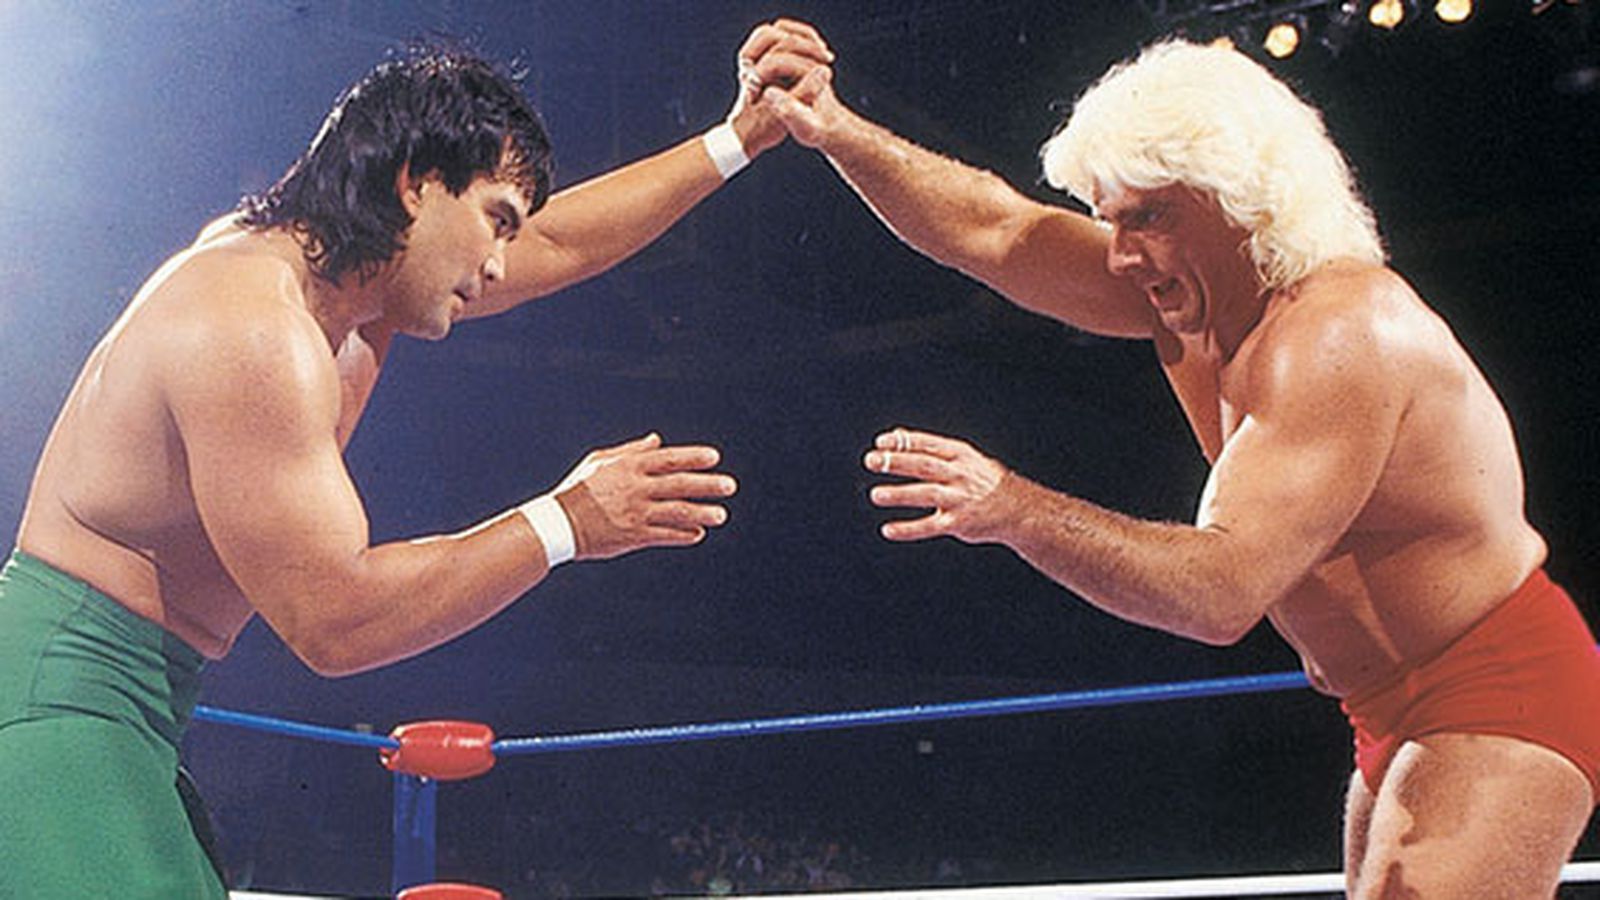 Ricky Steamboat vs. Ric Flair (WCW Chi-Town Rumble, 2/20/1989) - 9.55